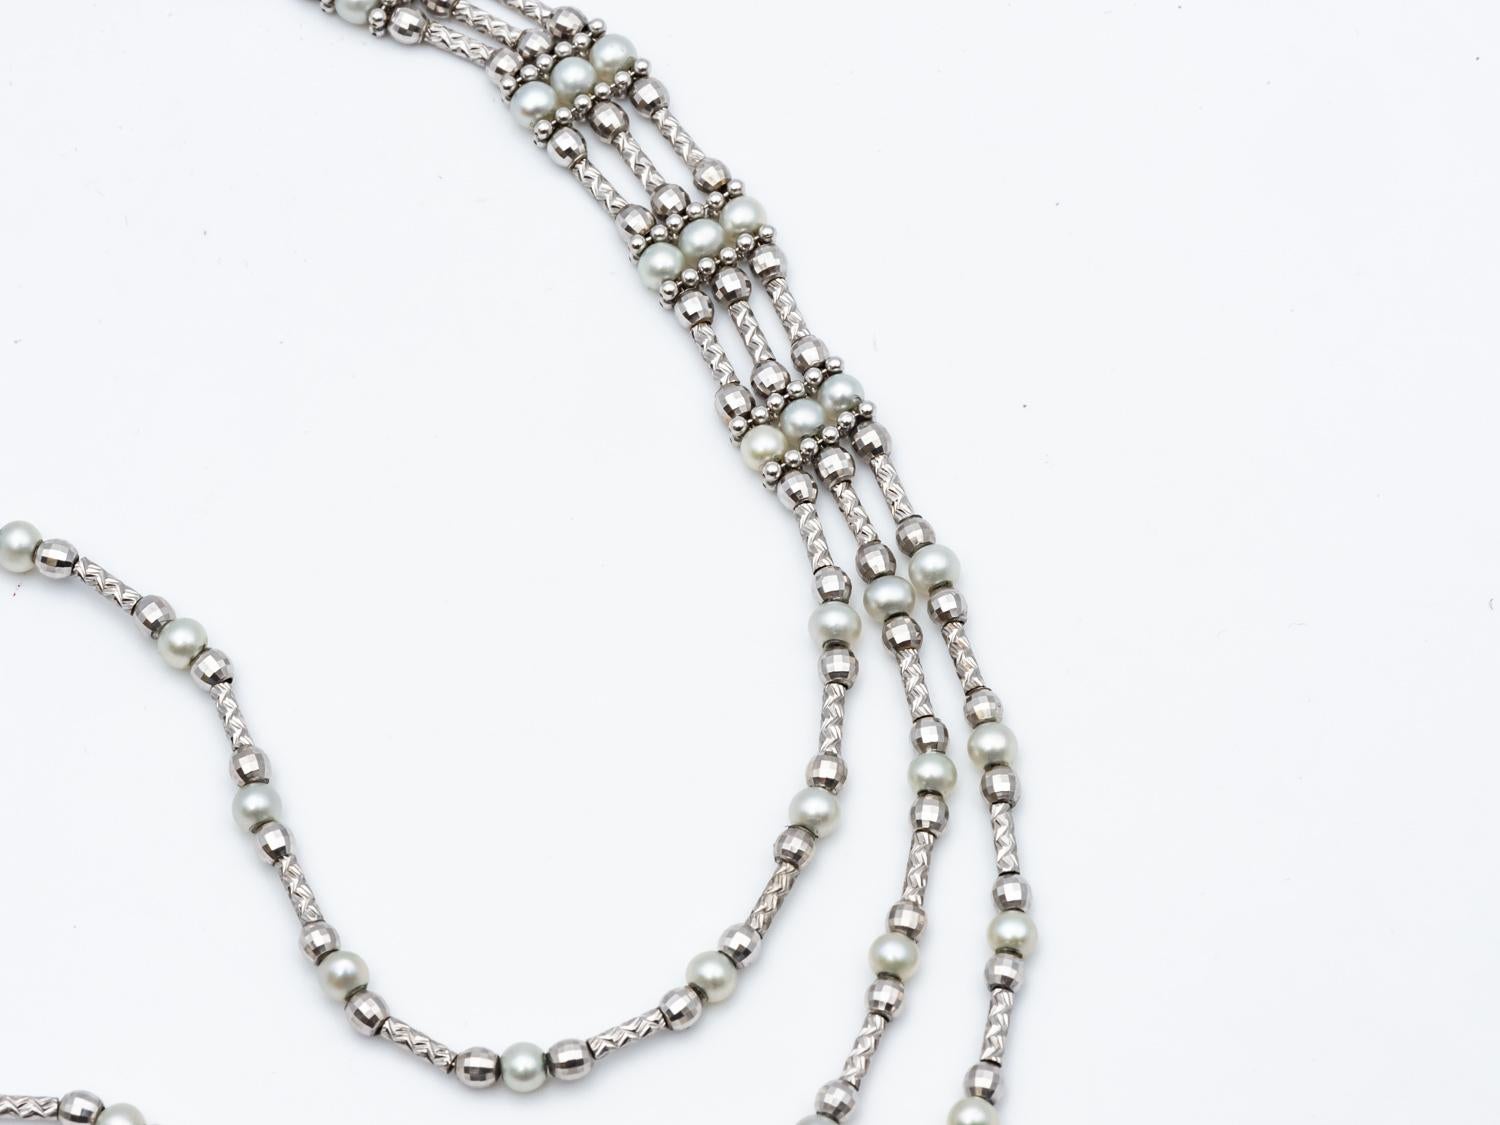 Flexible Necklace 3 Rows Fine Pearls White Gold 18 Karat In Excellent Condition For Sale In Vannes, FR